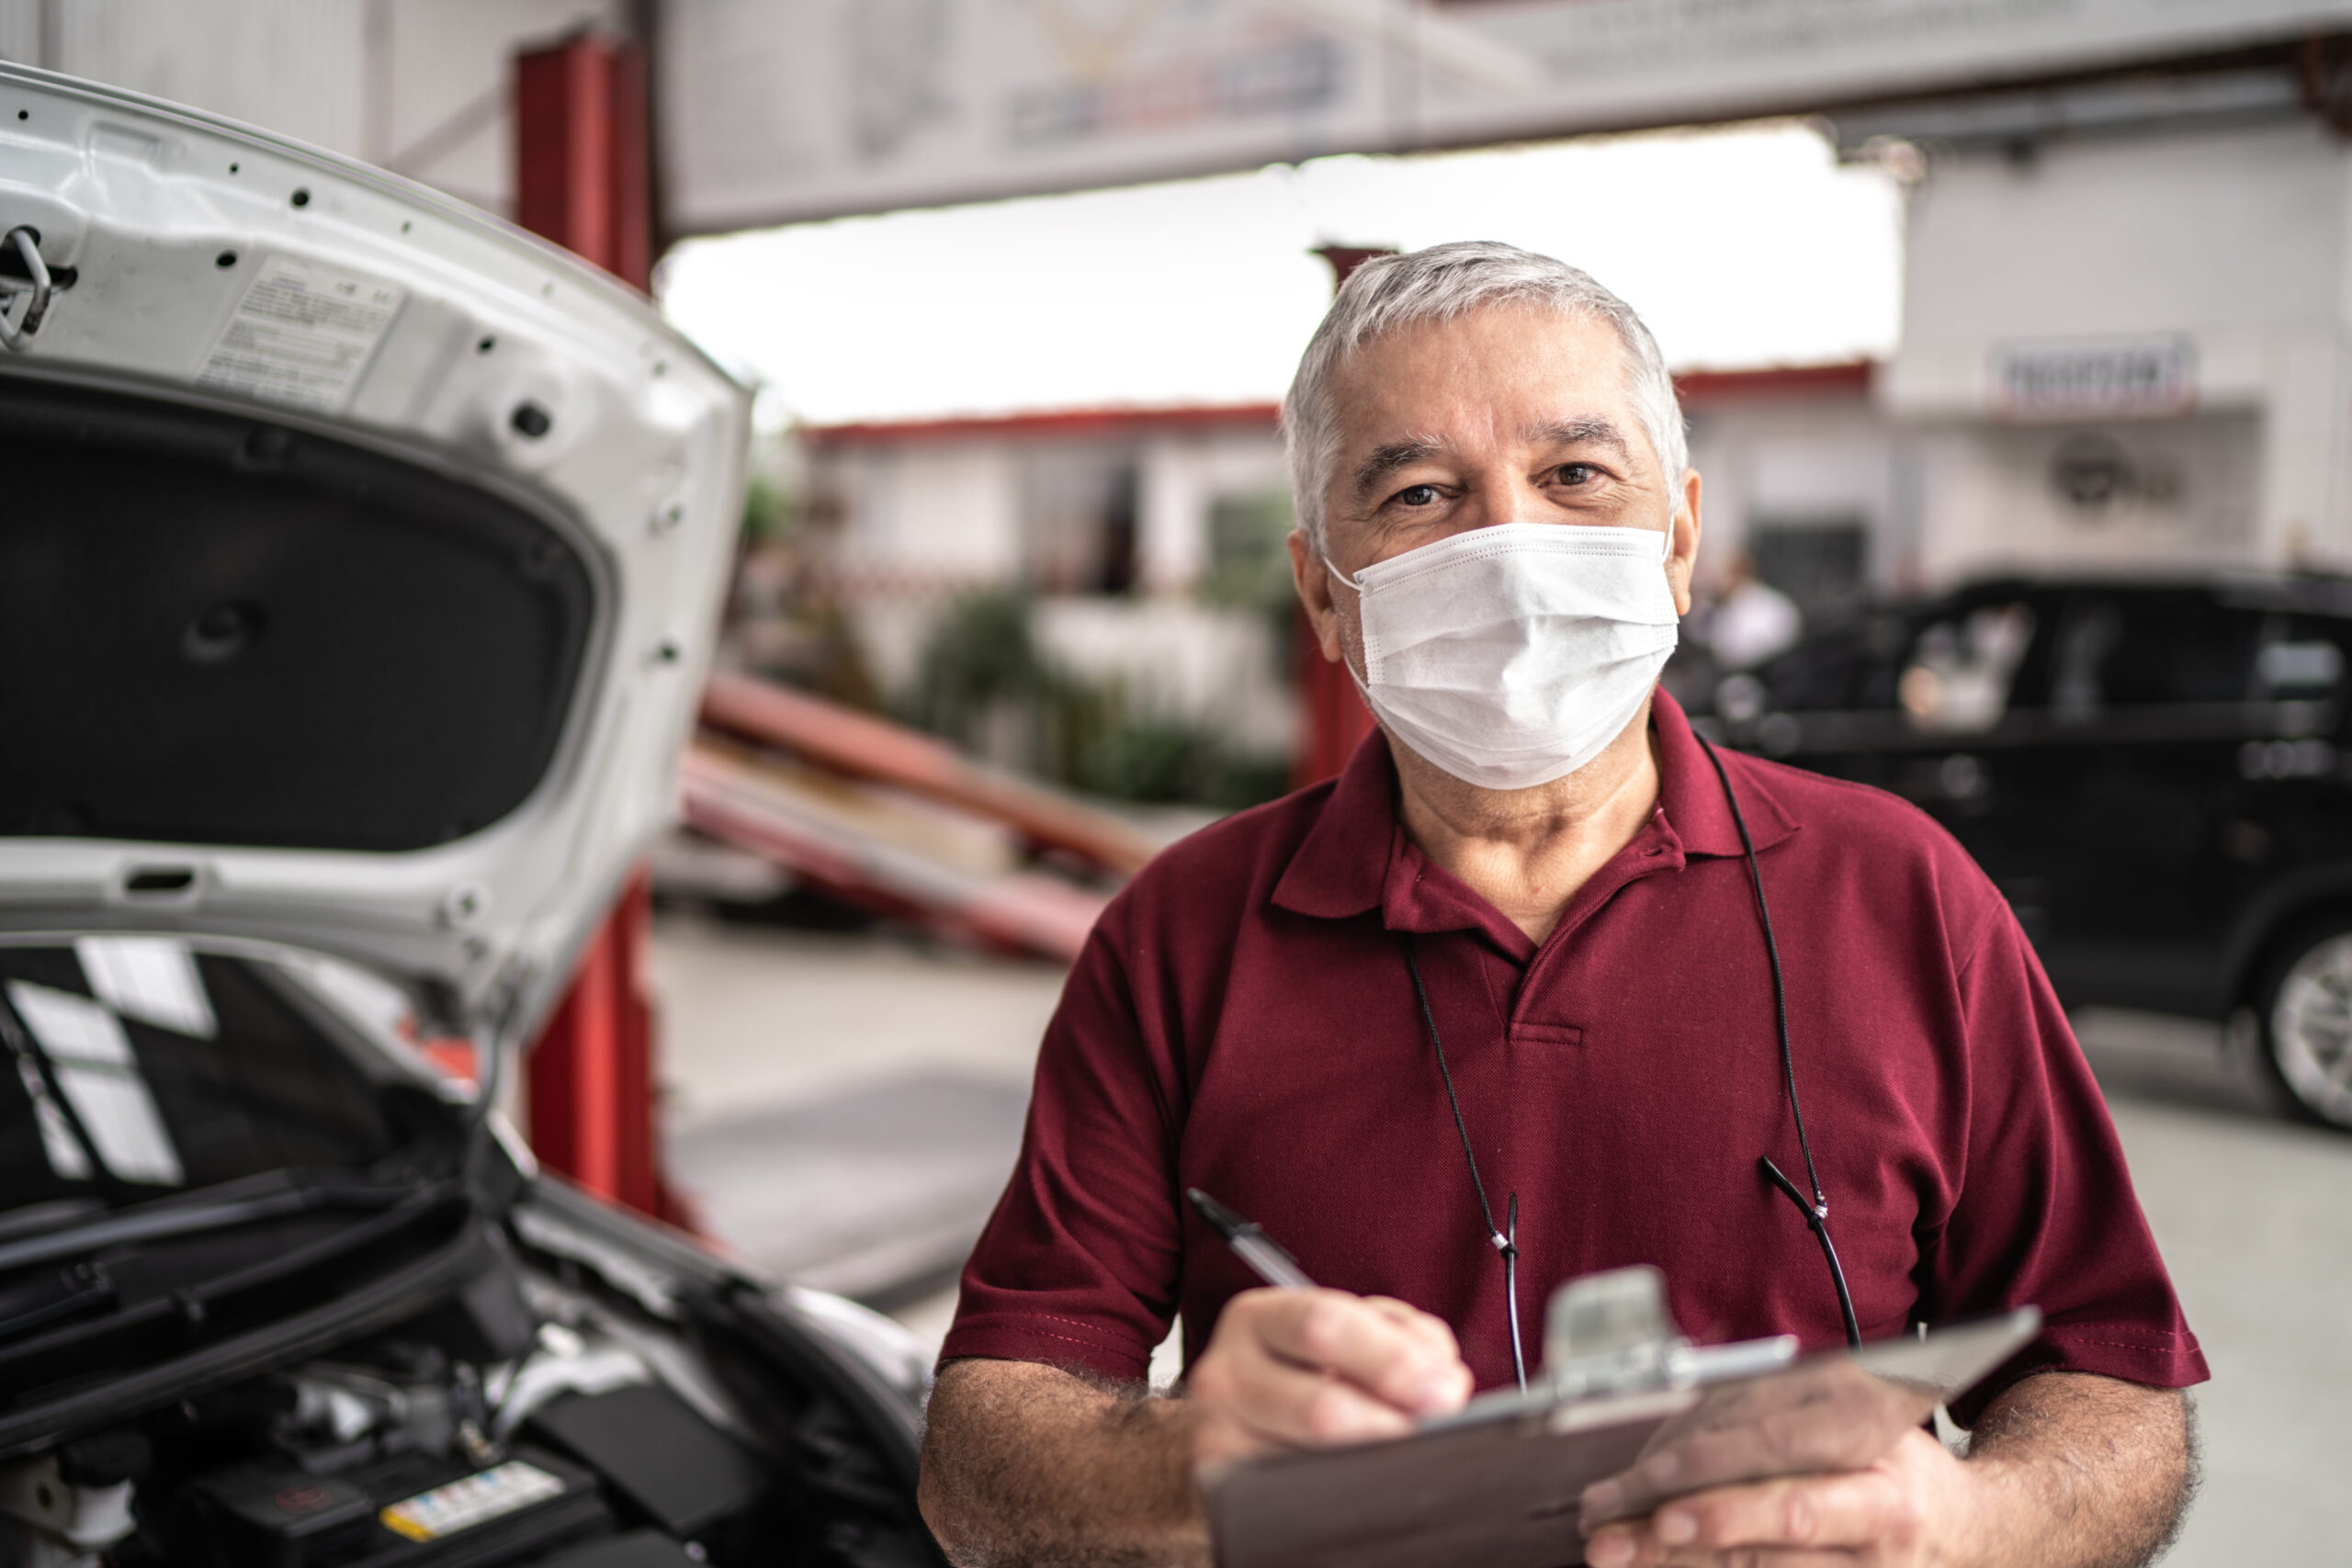 Portrait of auto mechanic senior man with face mask and conducting a safety audit at auto repair shop